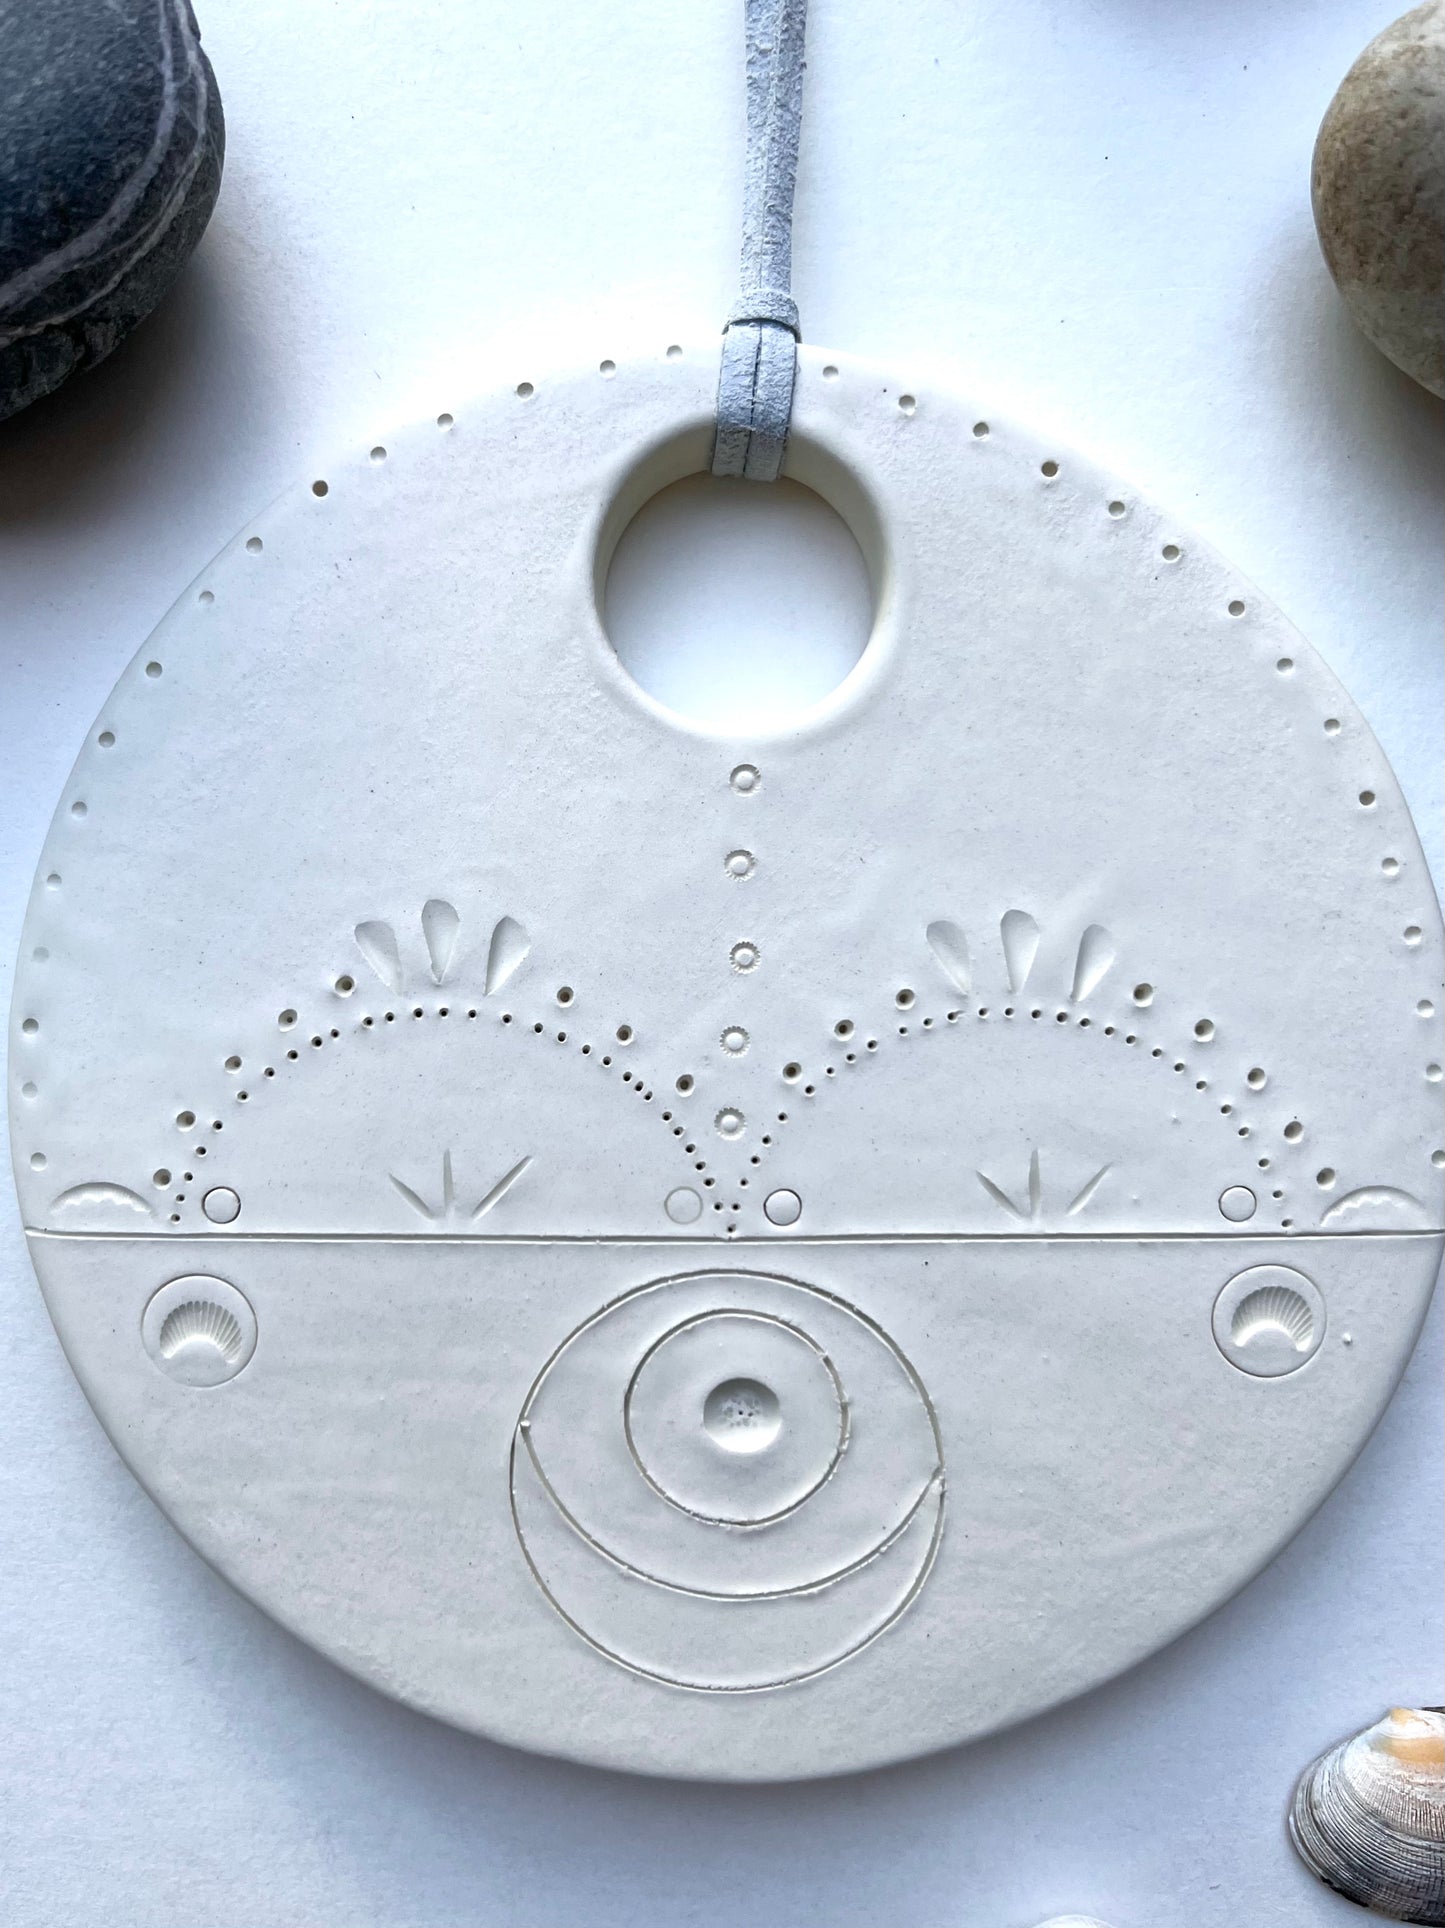 ‘footpath to peace' -  contemplation & peace one of a kind wall hanging plaque